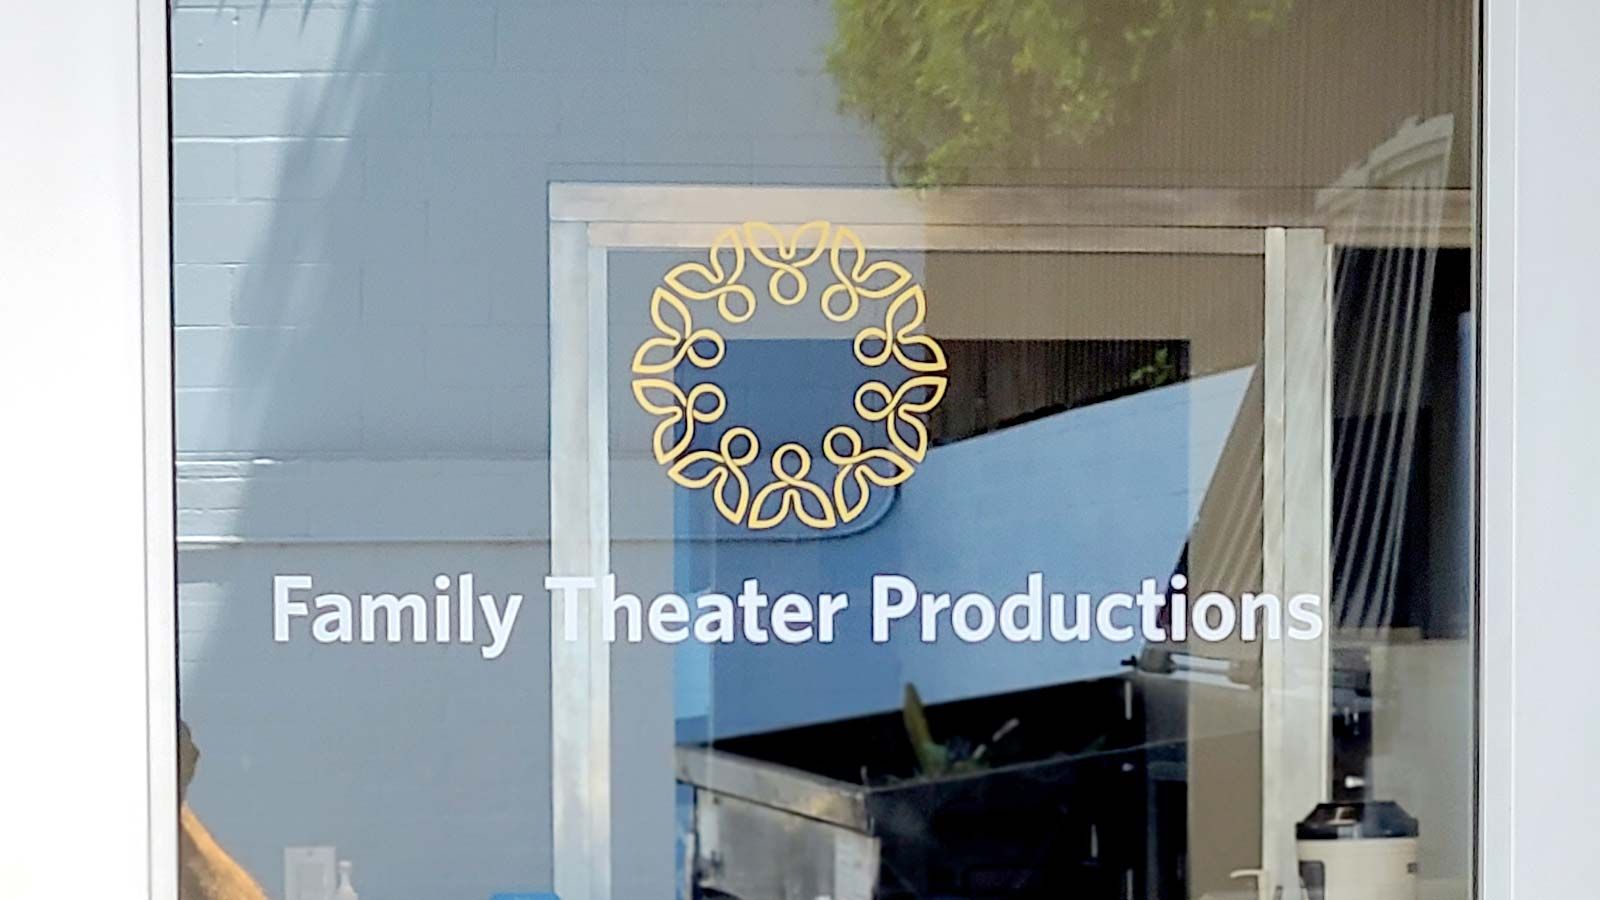 Family Theater Productions window lettering